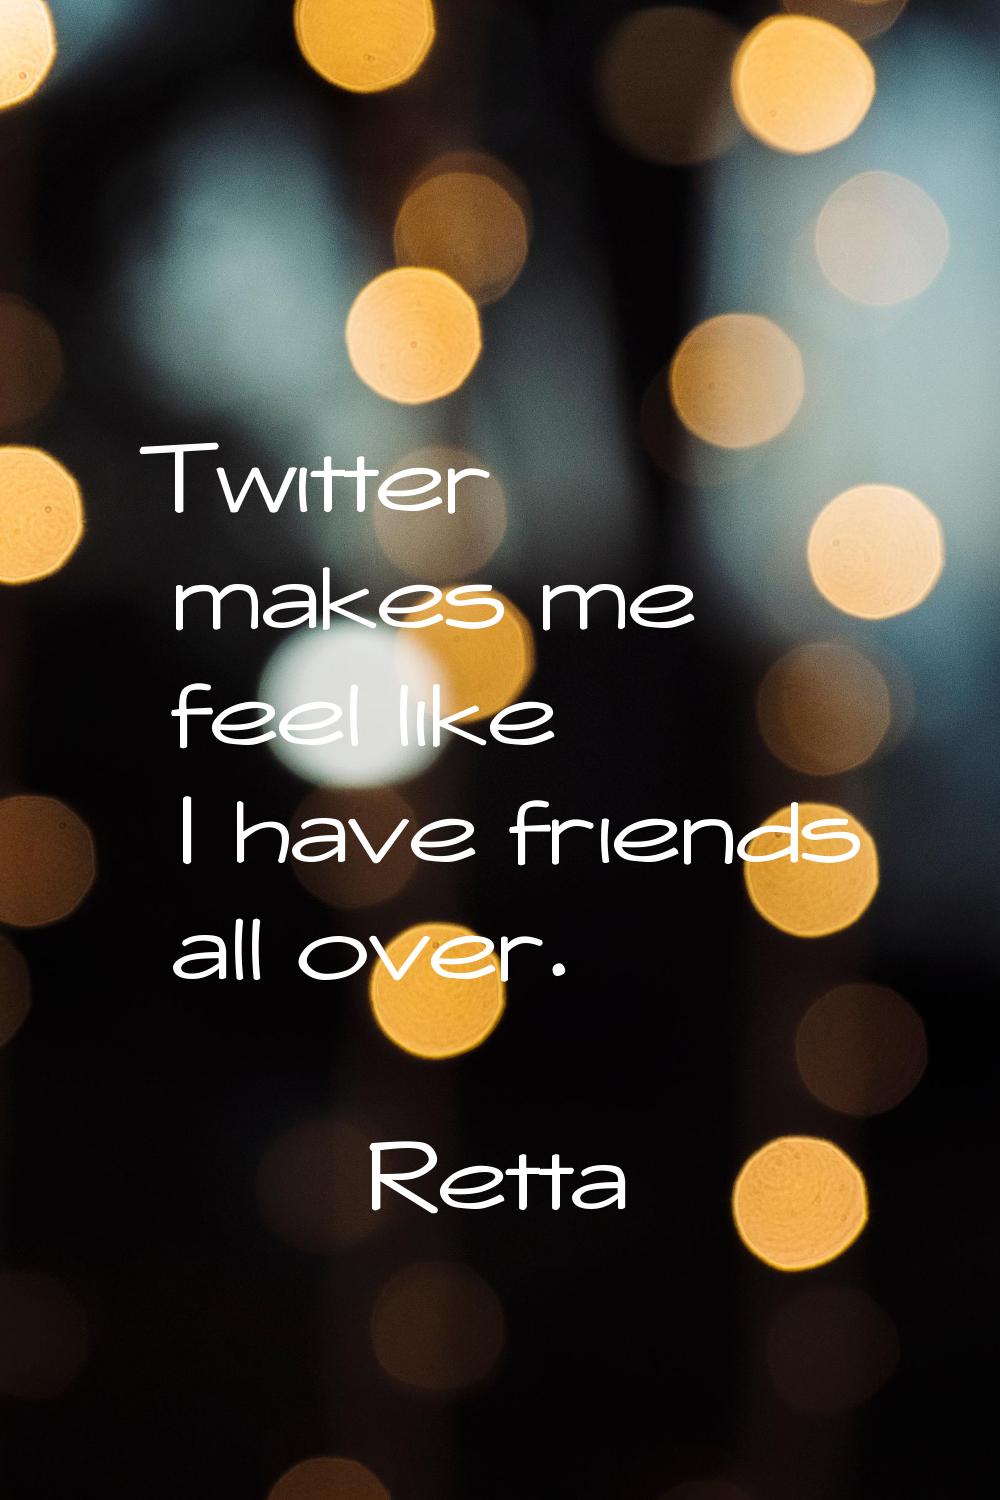 Twitter makes me feel like I have friends all over.